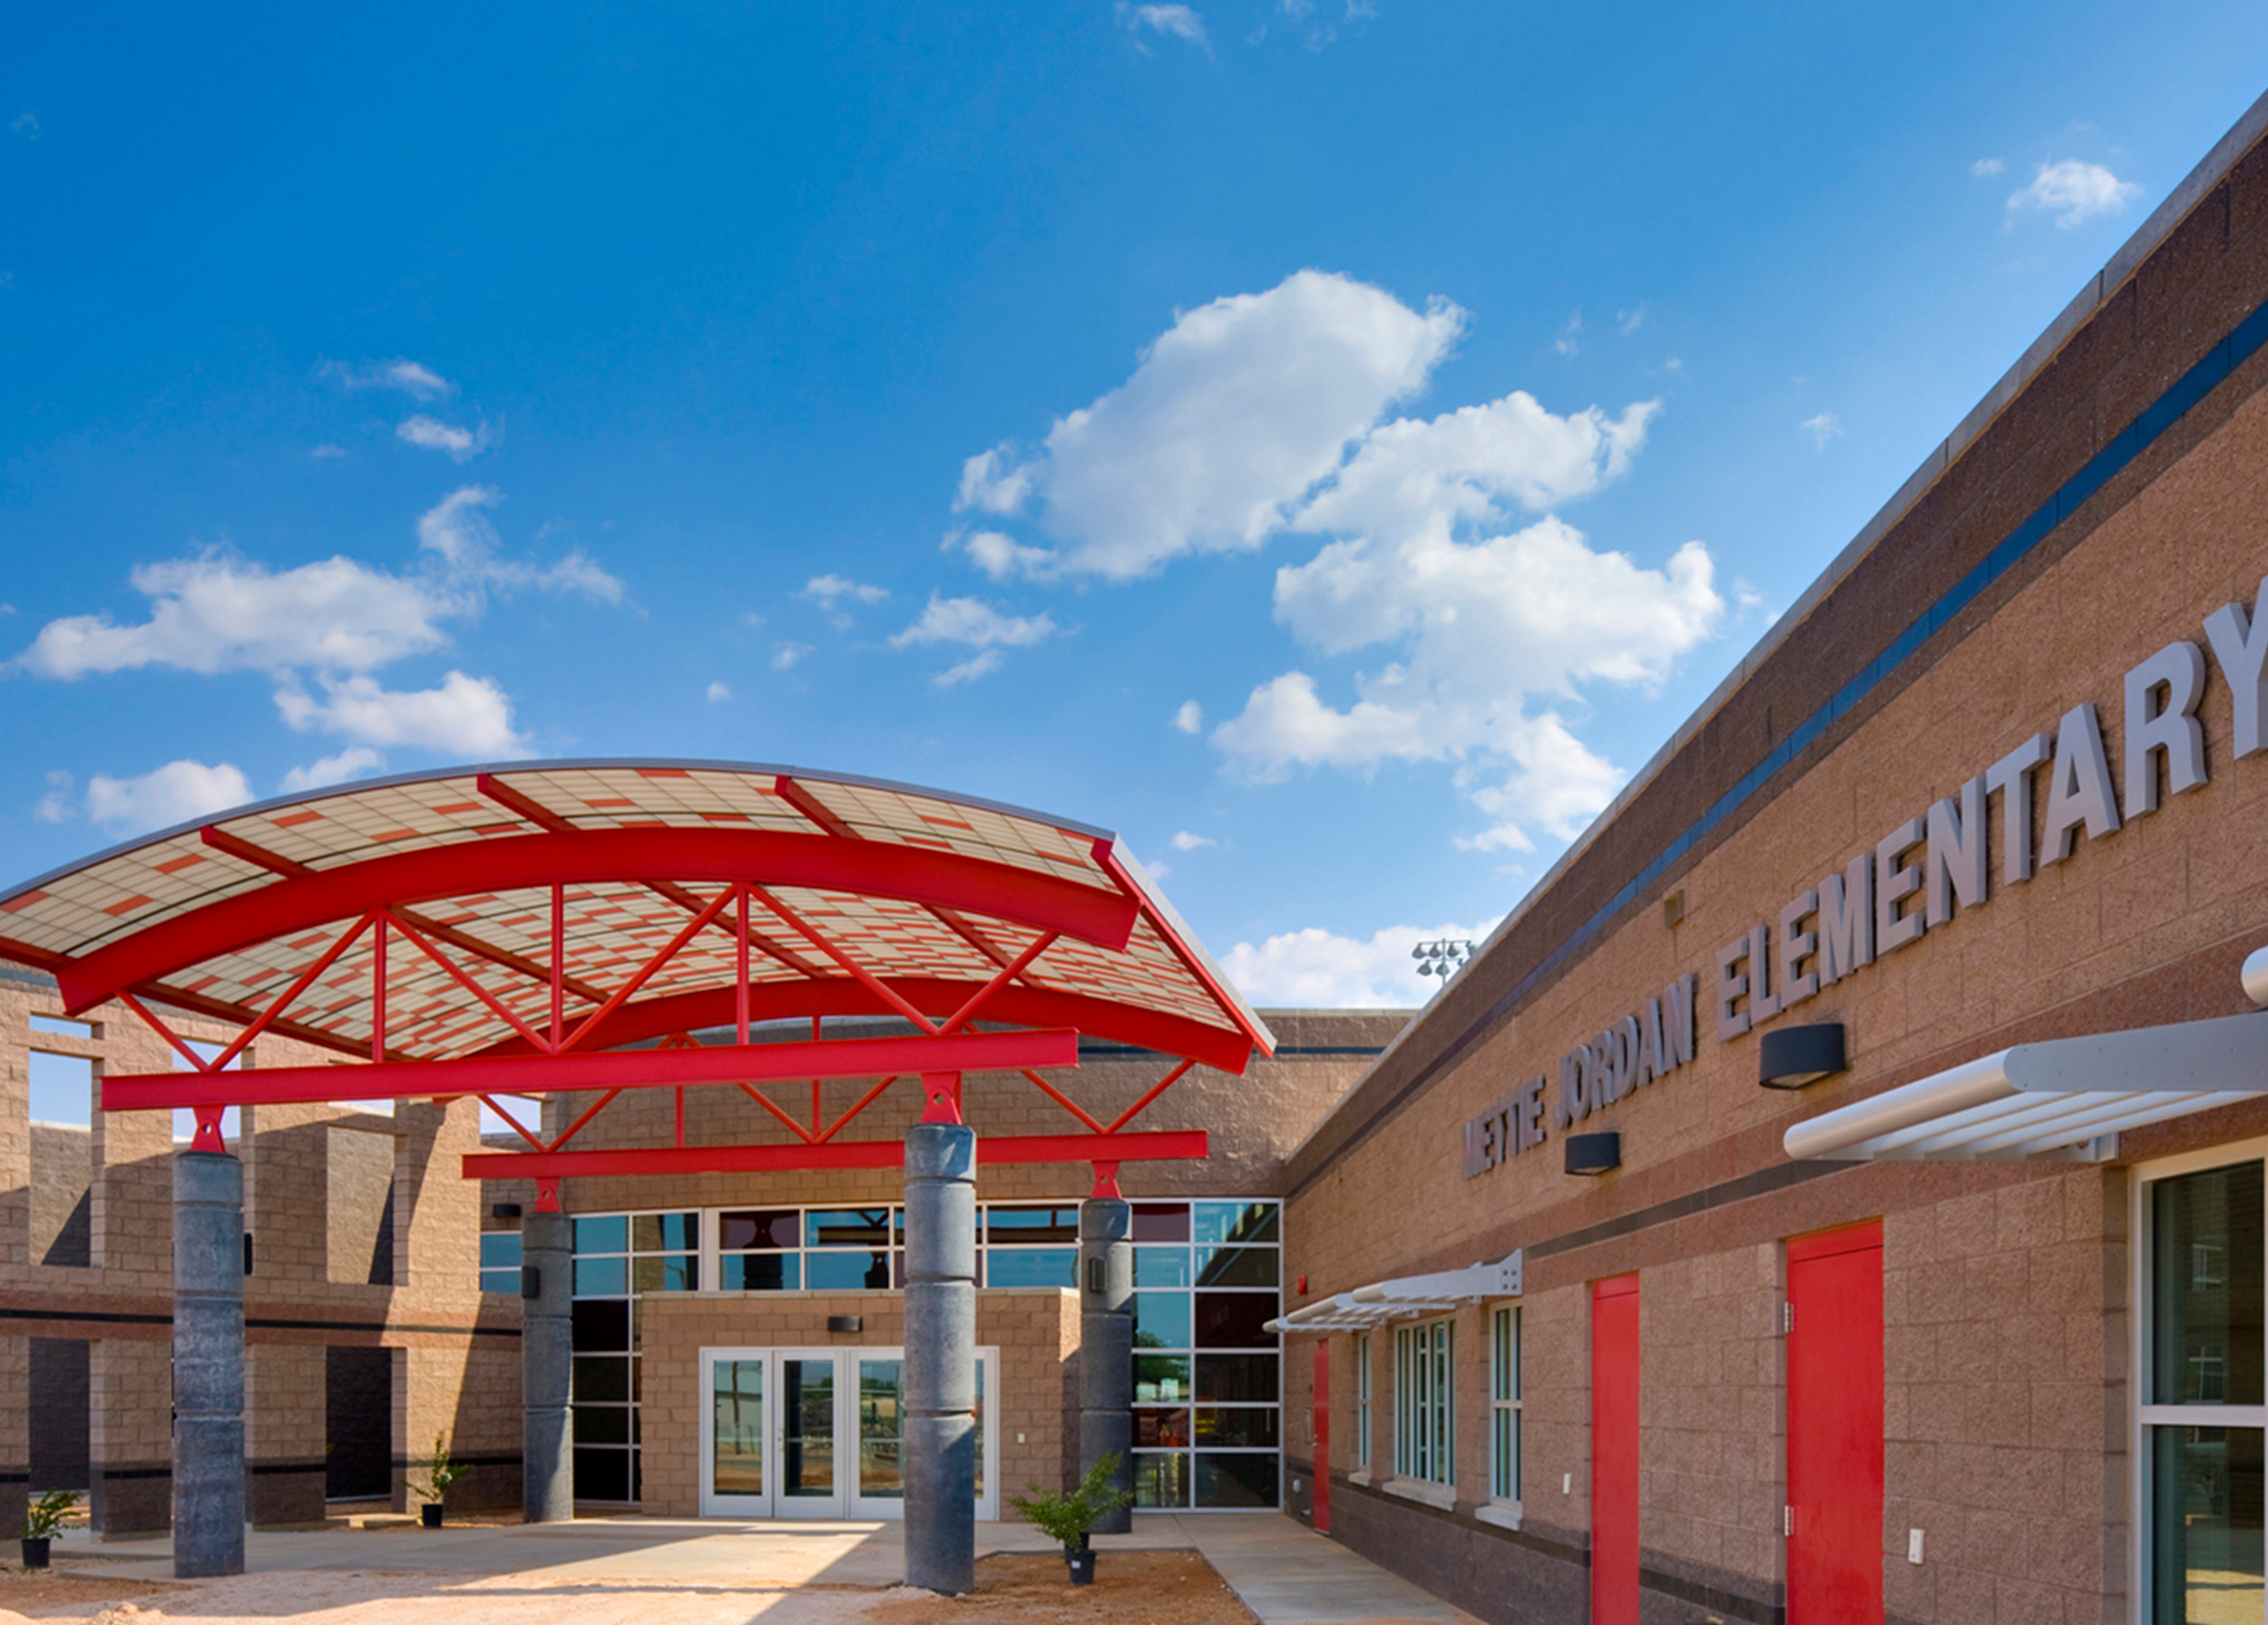 Wilson & Company architects designed the entry canopies to serve as gateways to the school and community; these and other architectural elements are abstract representations of the energy business to support the community spirit. 